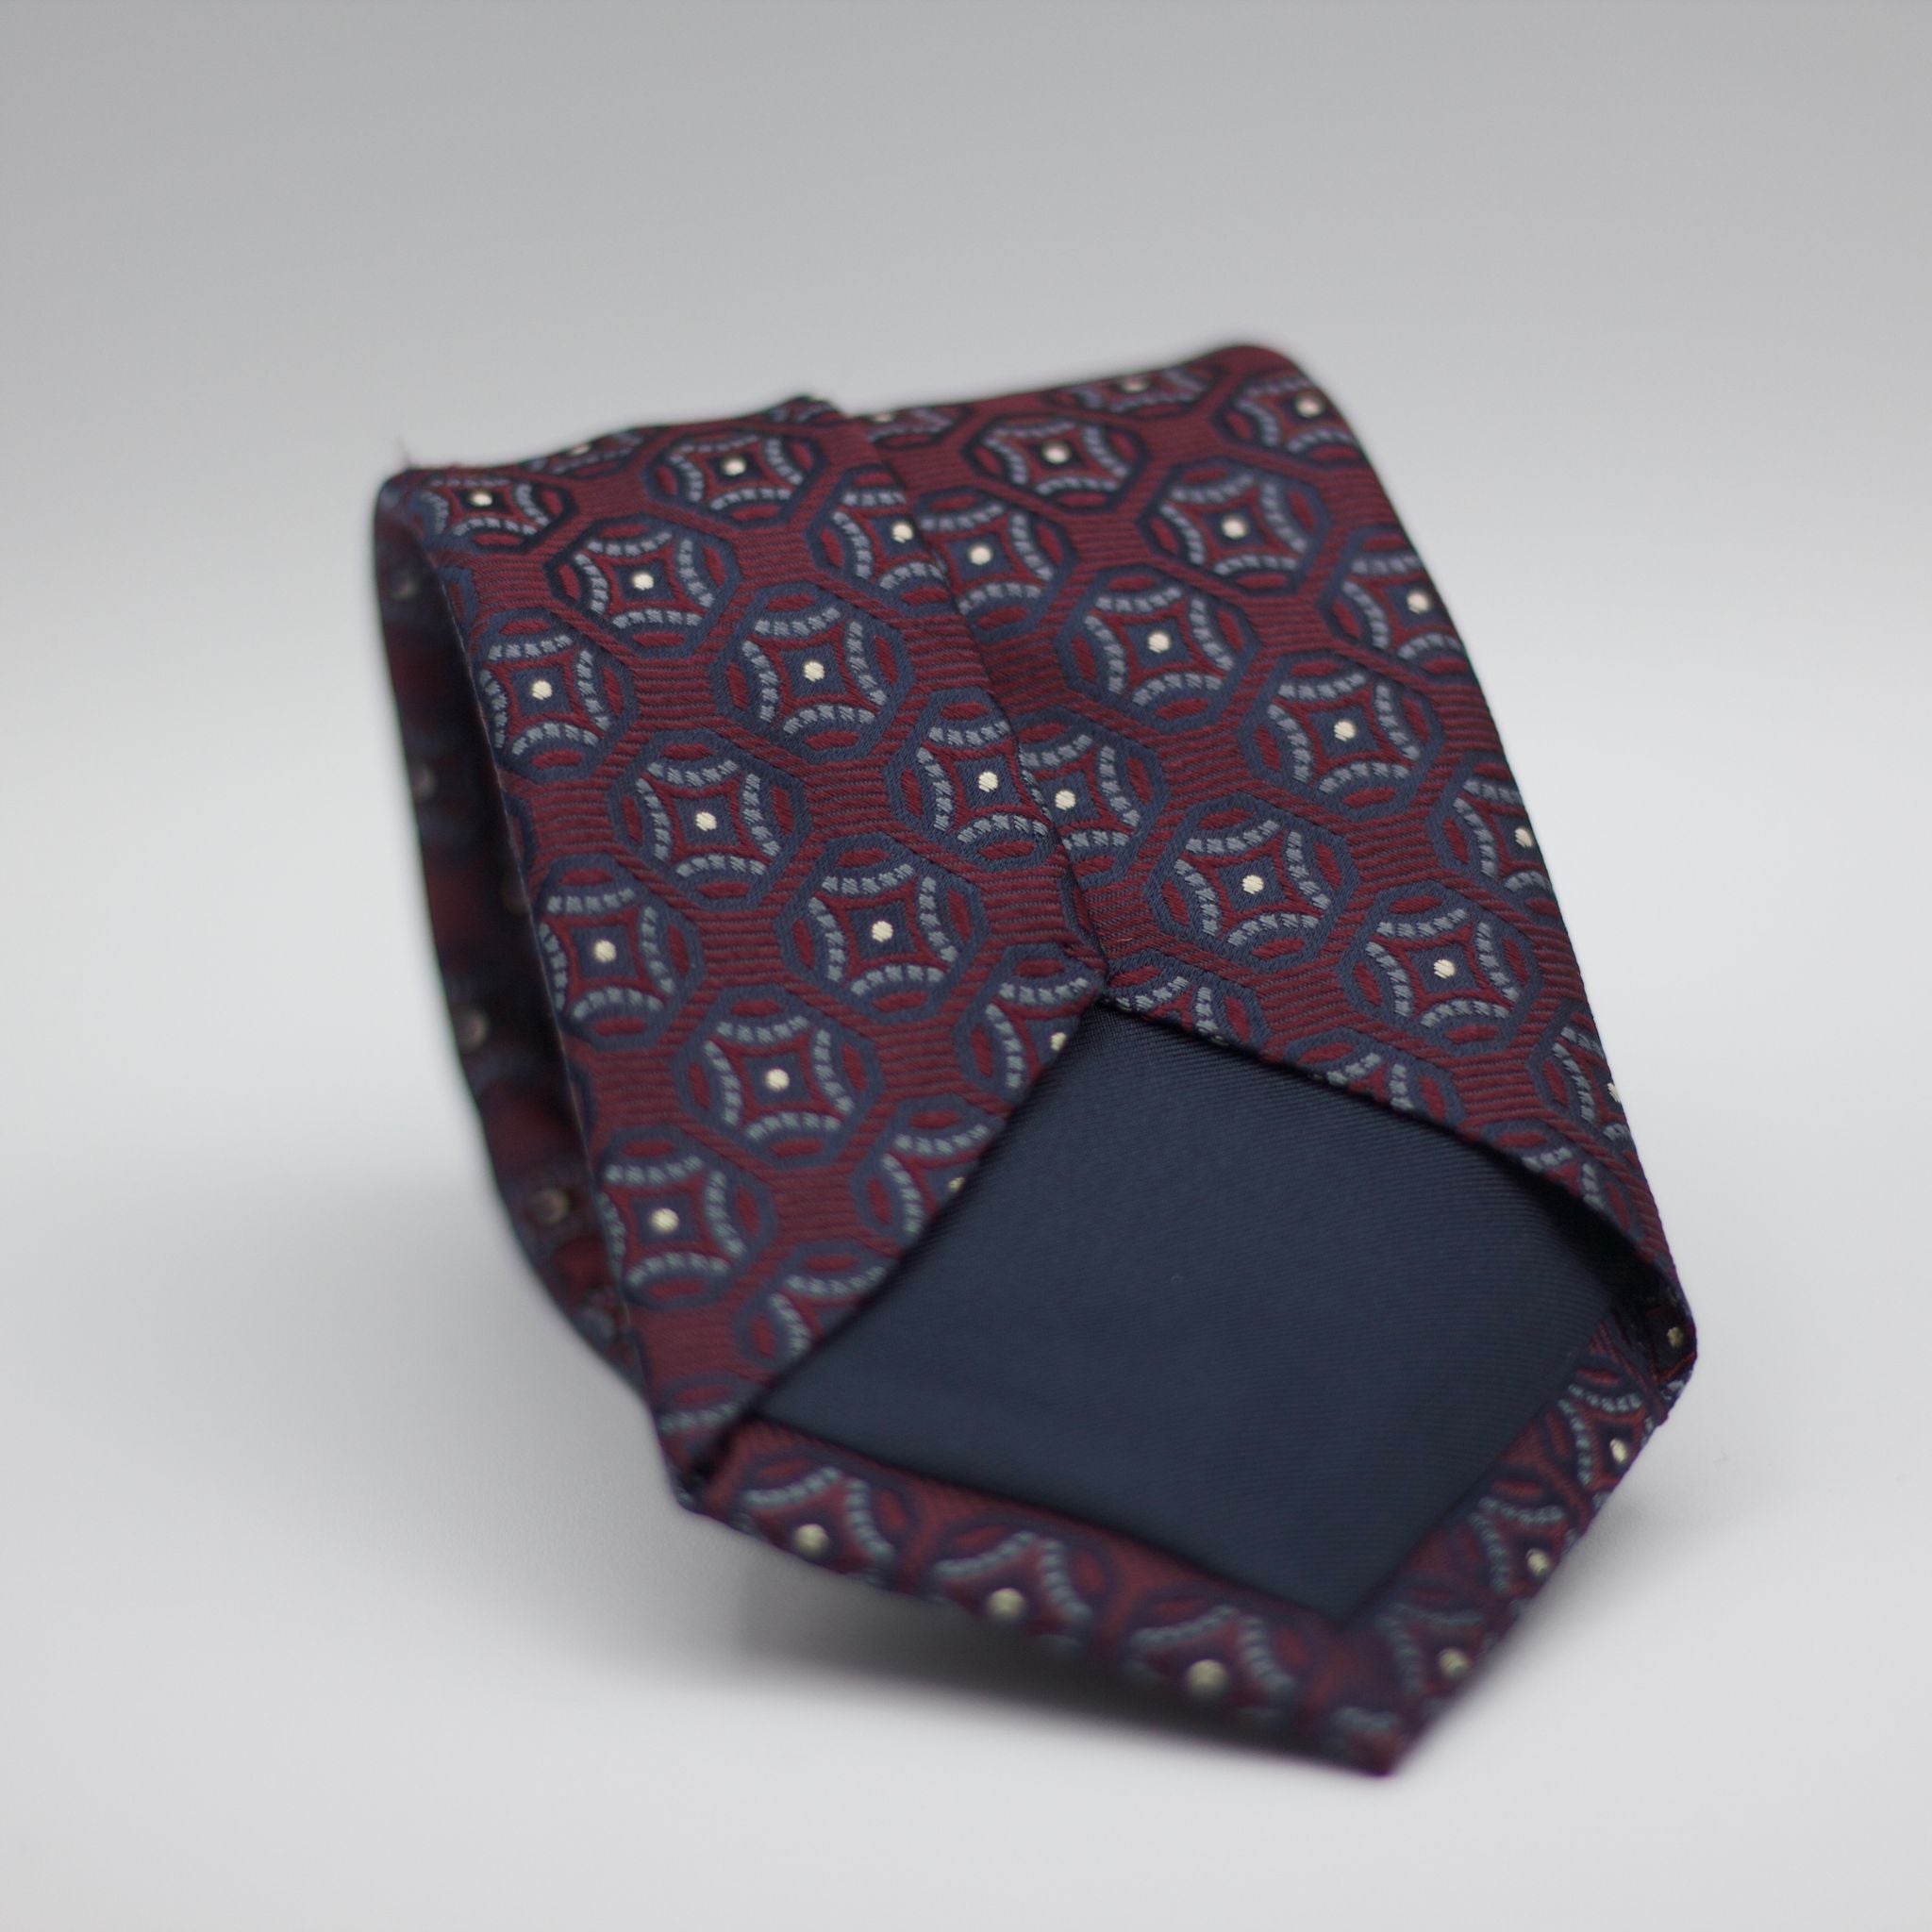 Holliday & Brown for Cruciani & Bella 100% Woven Jacquard Silk Tipped Burgundy with Grey and Blue Navy motif tie  Handmade in Italy 8 cm x 150 cm #6989